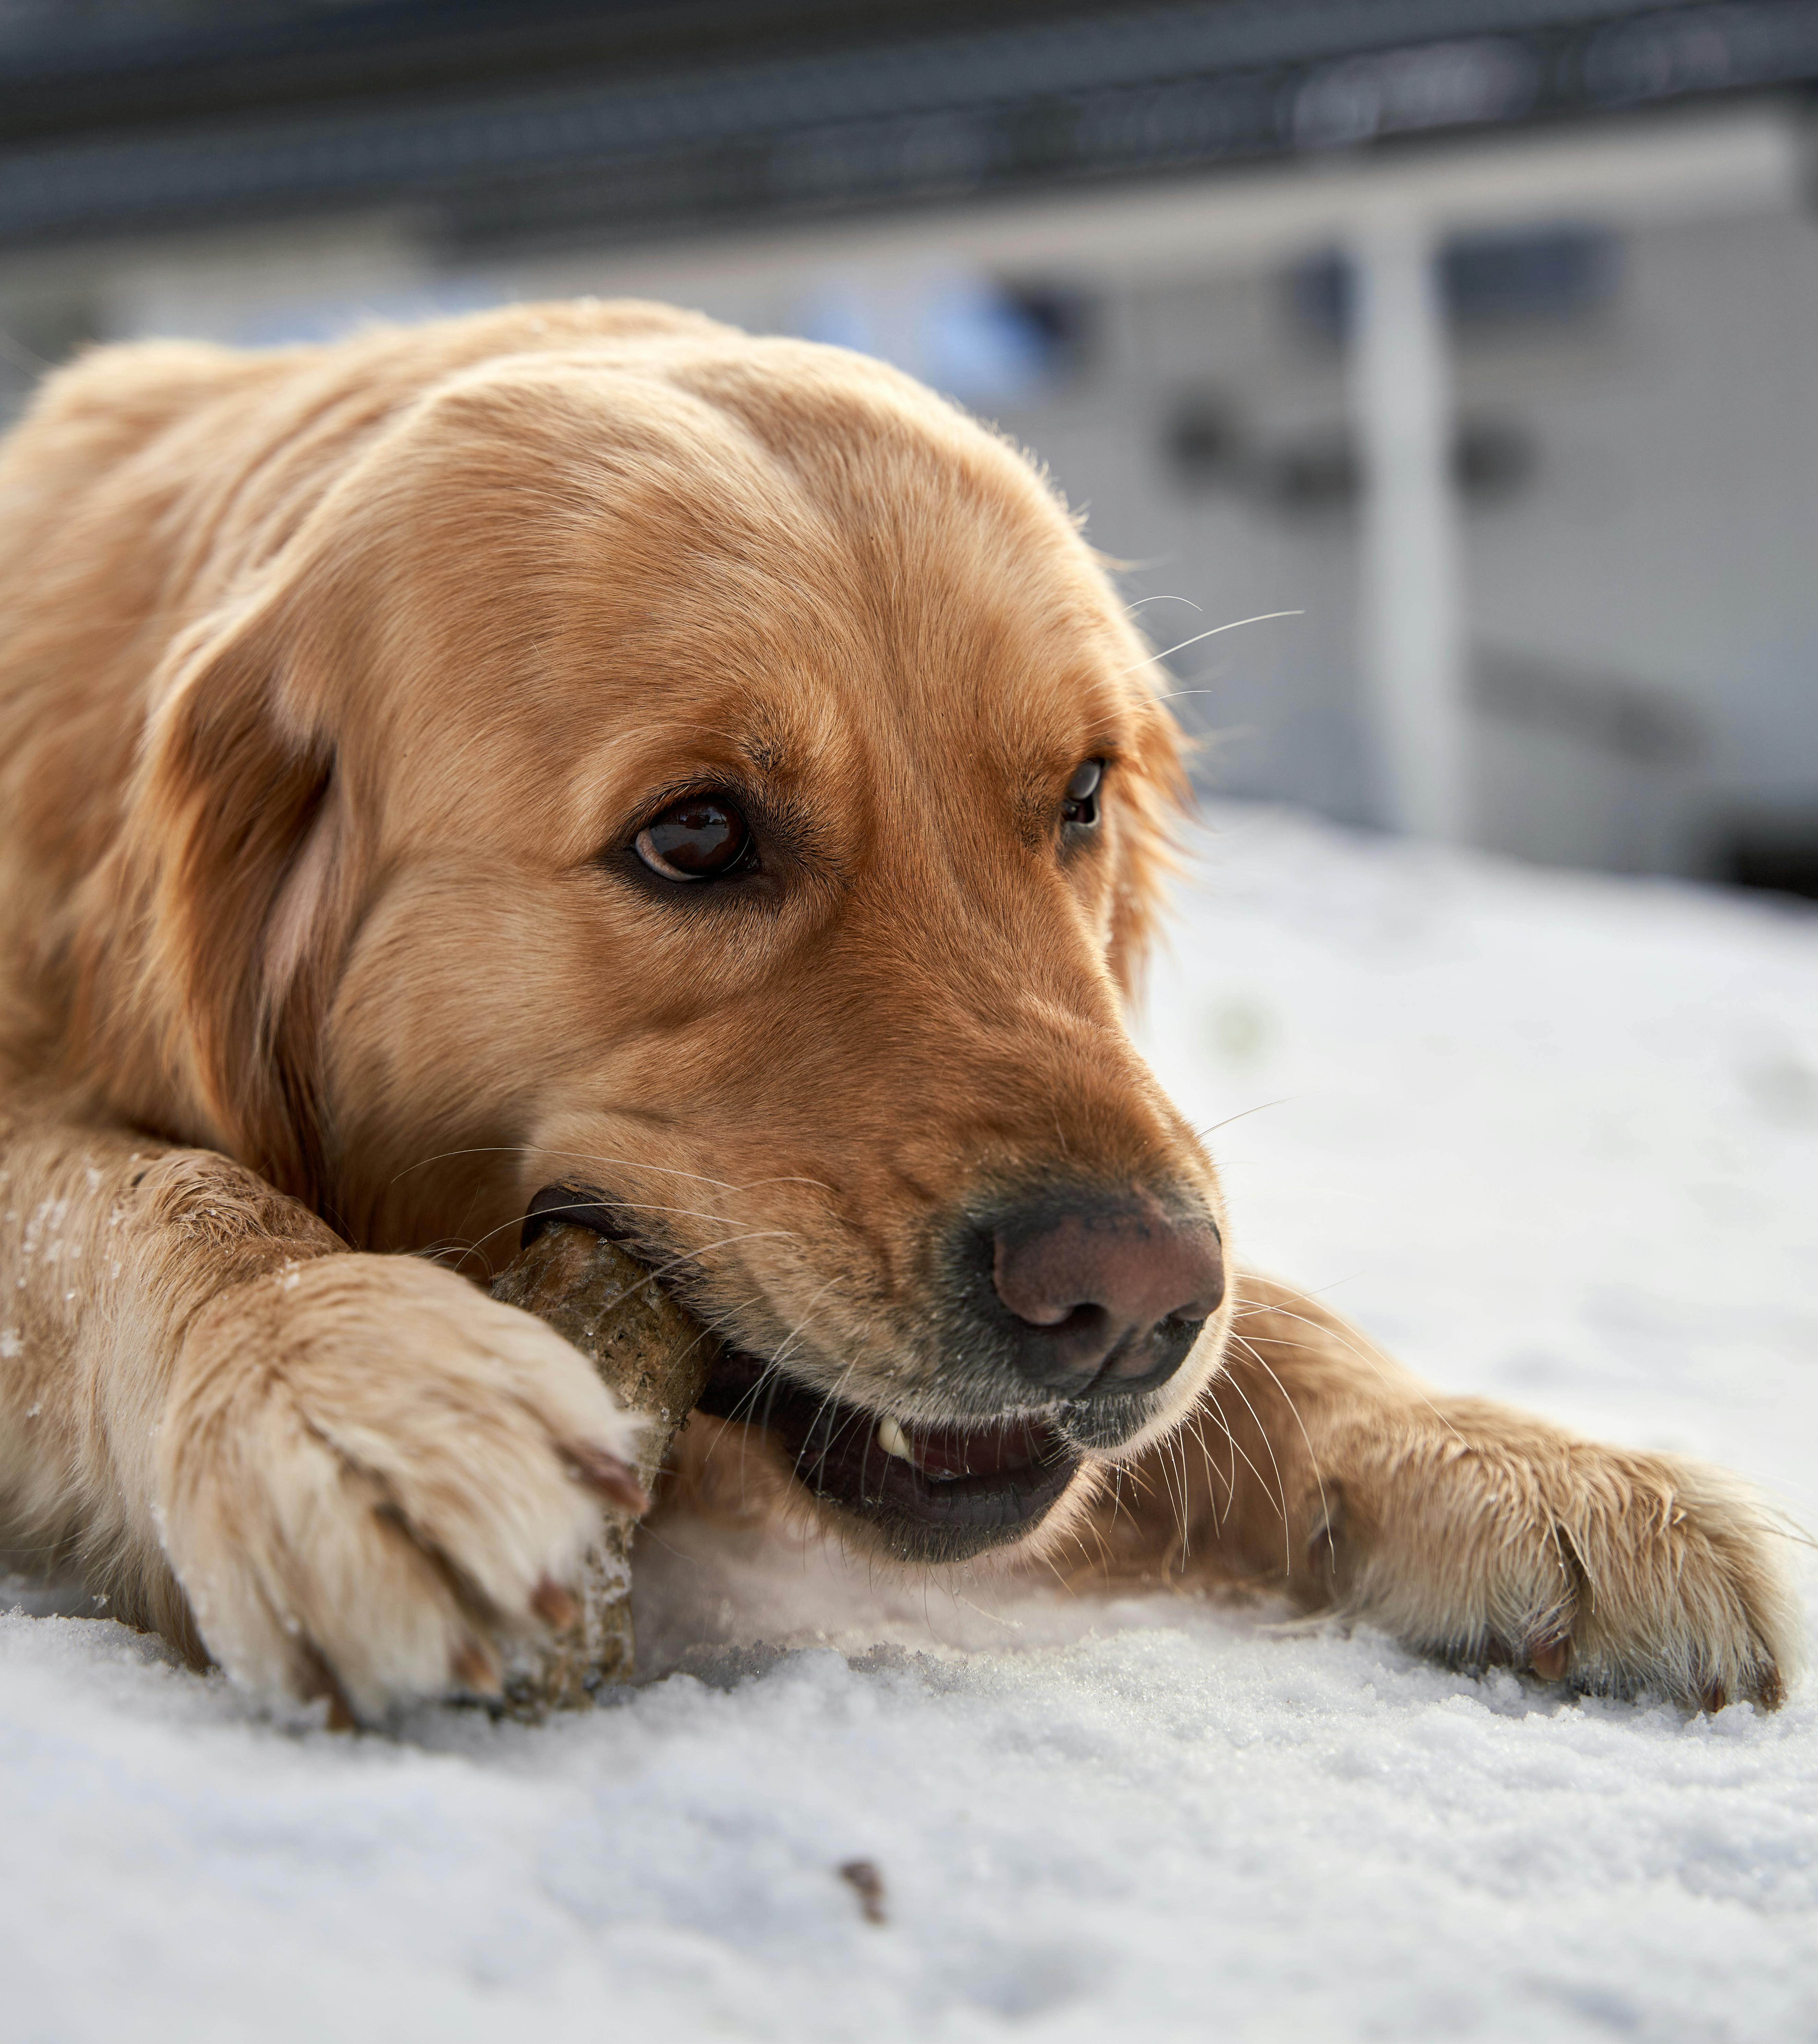 Is Chewing Bad For My Dog's Dental Health?